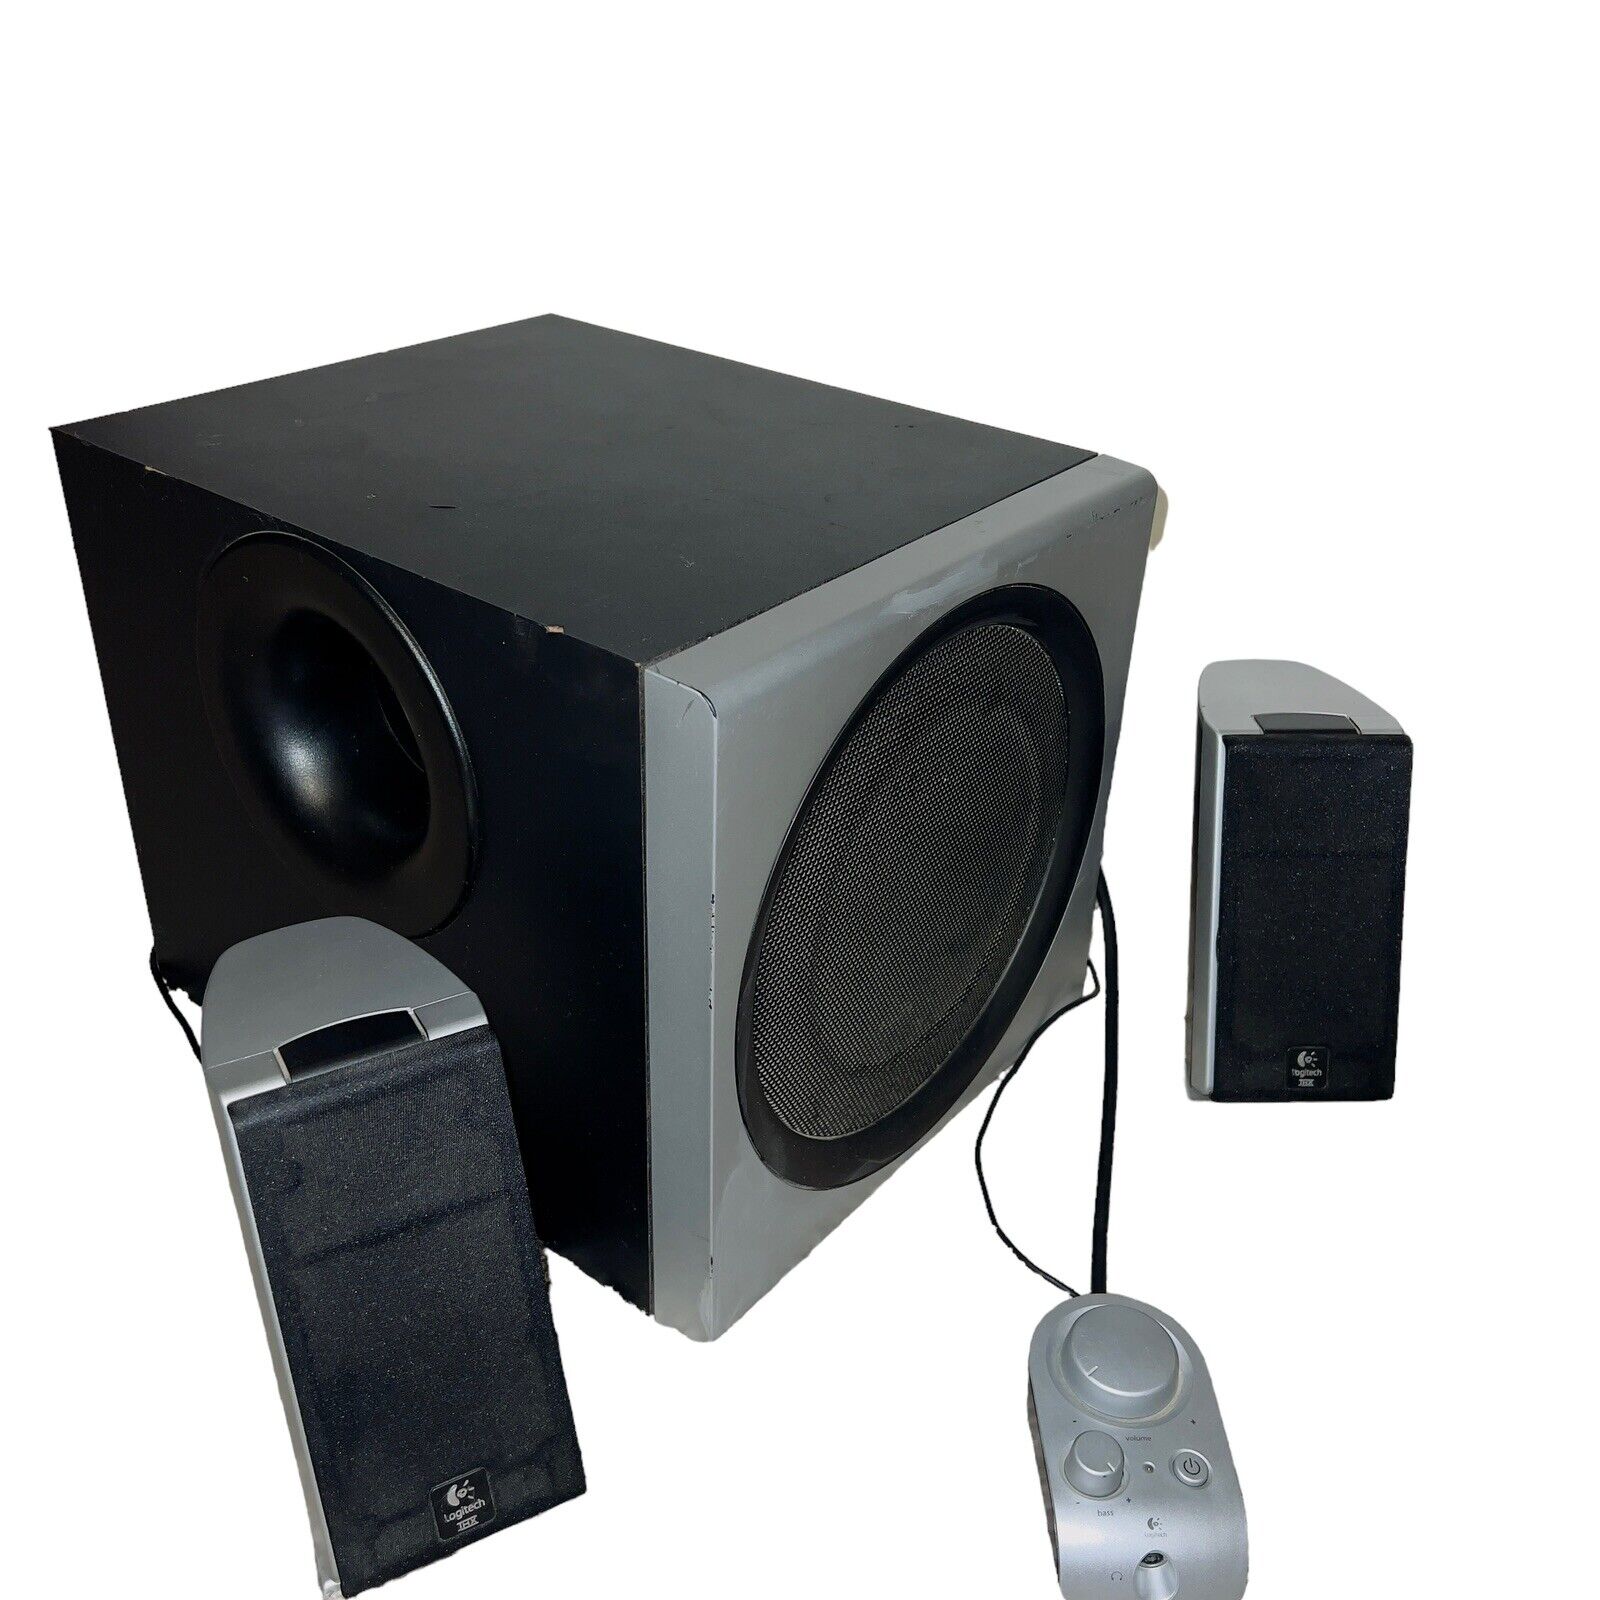 Logitech Z-2300 2.1 Speaker System Stereo Subwoofer With Remote Control THX 200W